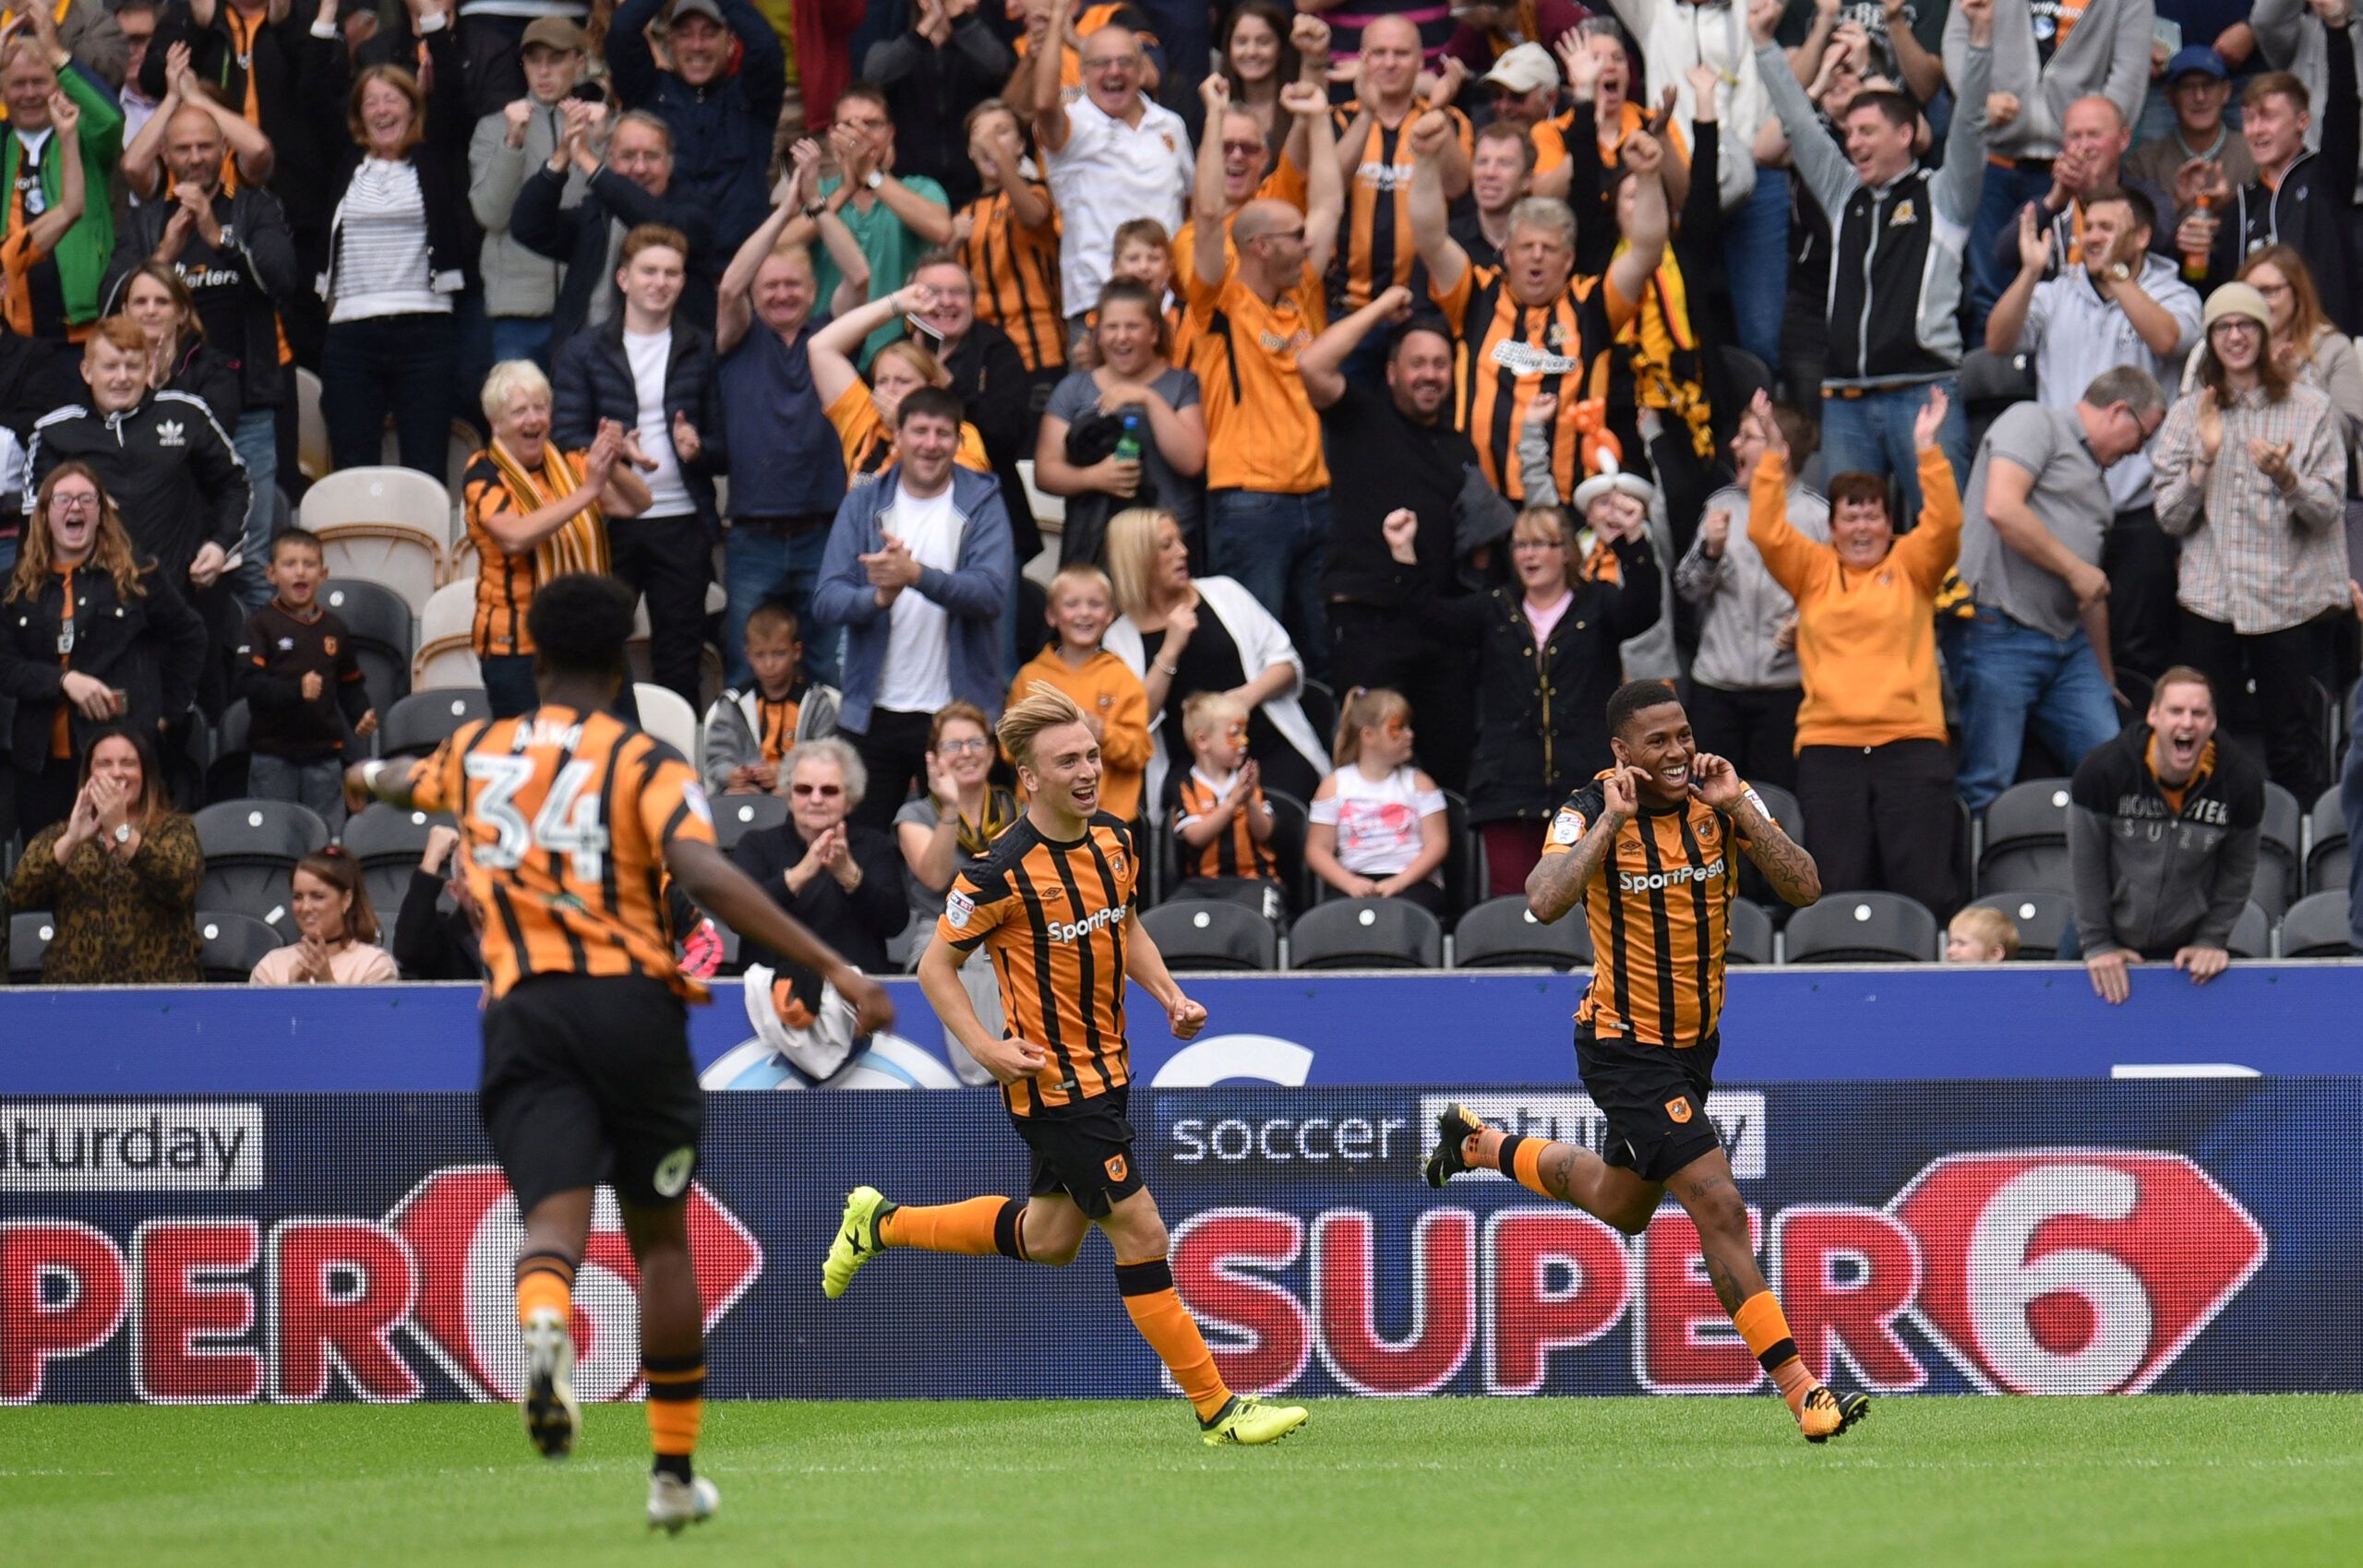 Soccer Football - Championship - Hull City vs Burton Albion - Hull, Britain - August 12, 2017   Hull City's Abel Hernandez celebrates scoring their first goal   Action Images/Paul Burrows  EDITORIAL USE ONLY. No use with unauthorized audio, video, data, fixture lists, club/league logos or 